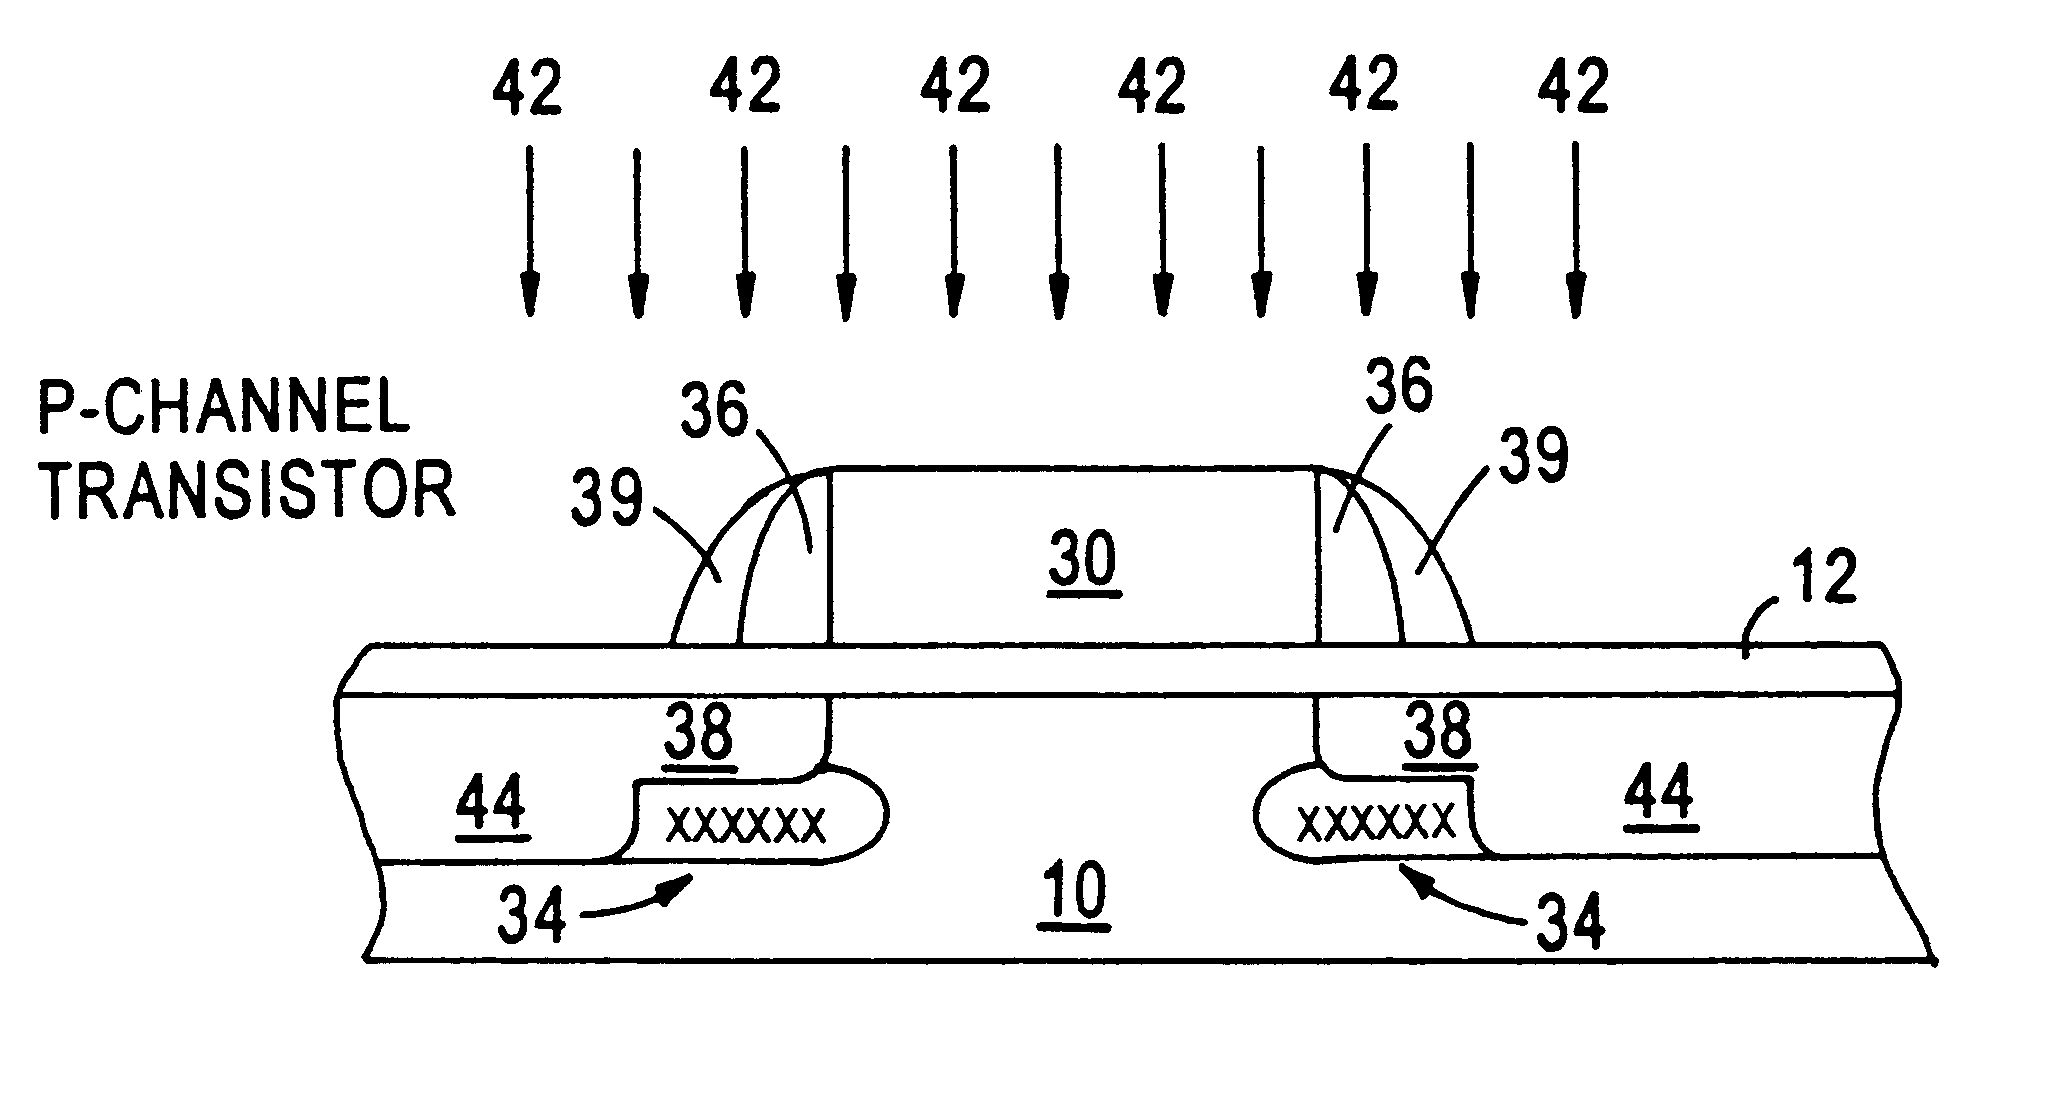 CMOS processing employing zero degree halo implant for P-channel transistor